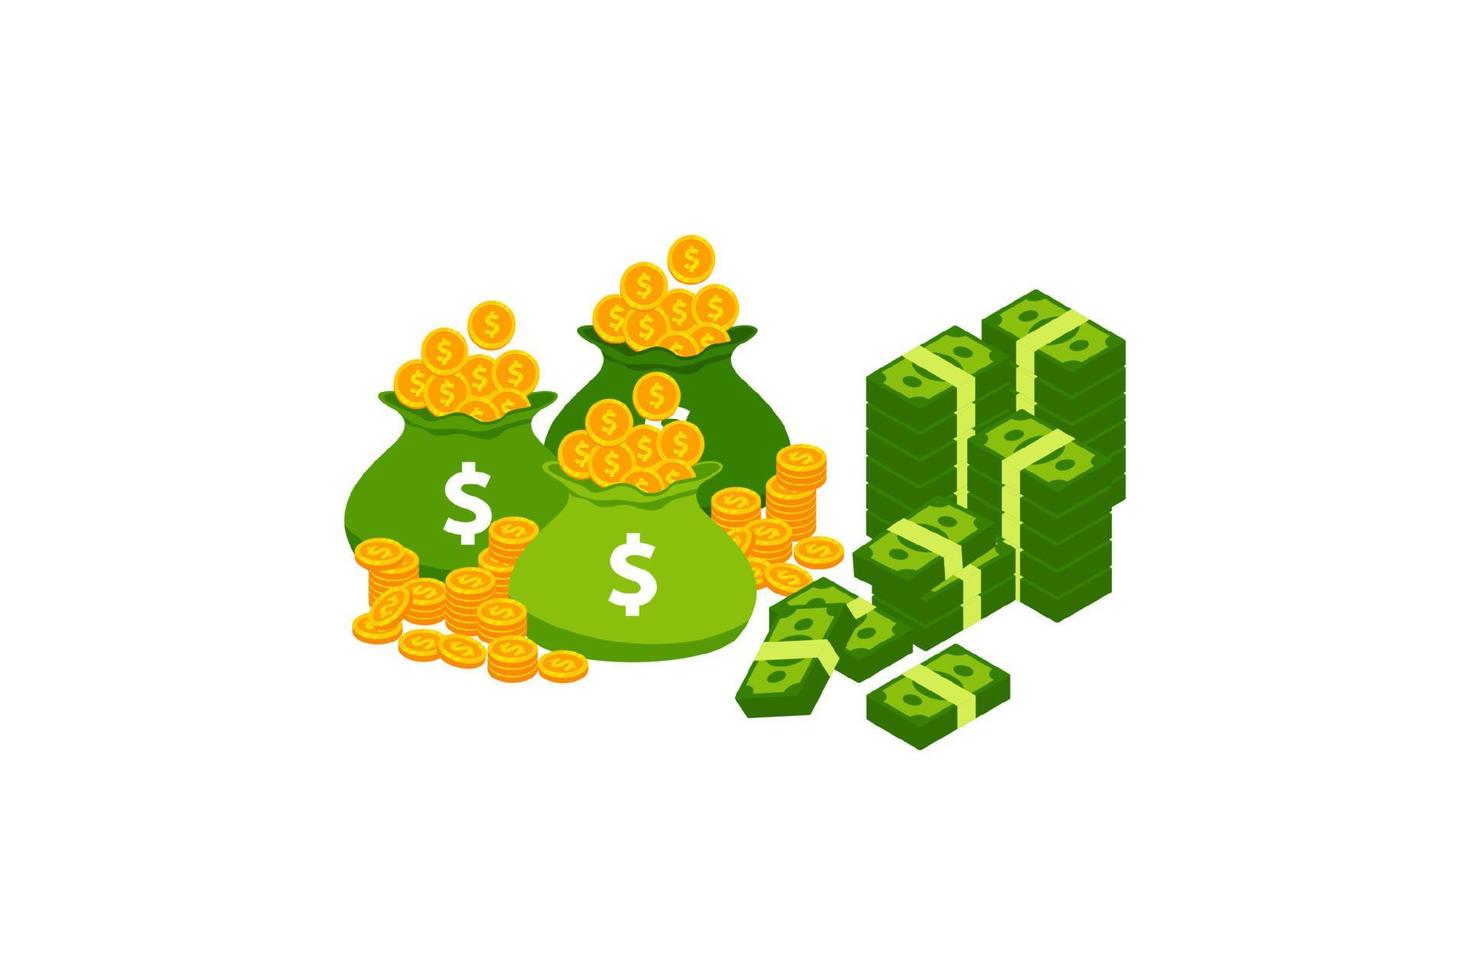 Pile of cash. A lot of money. Green banknote and coins vector icon illustrations